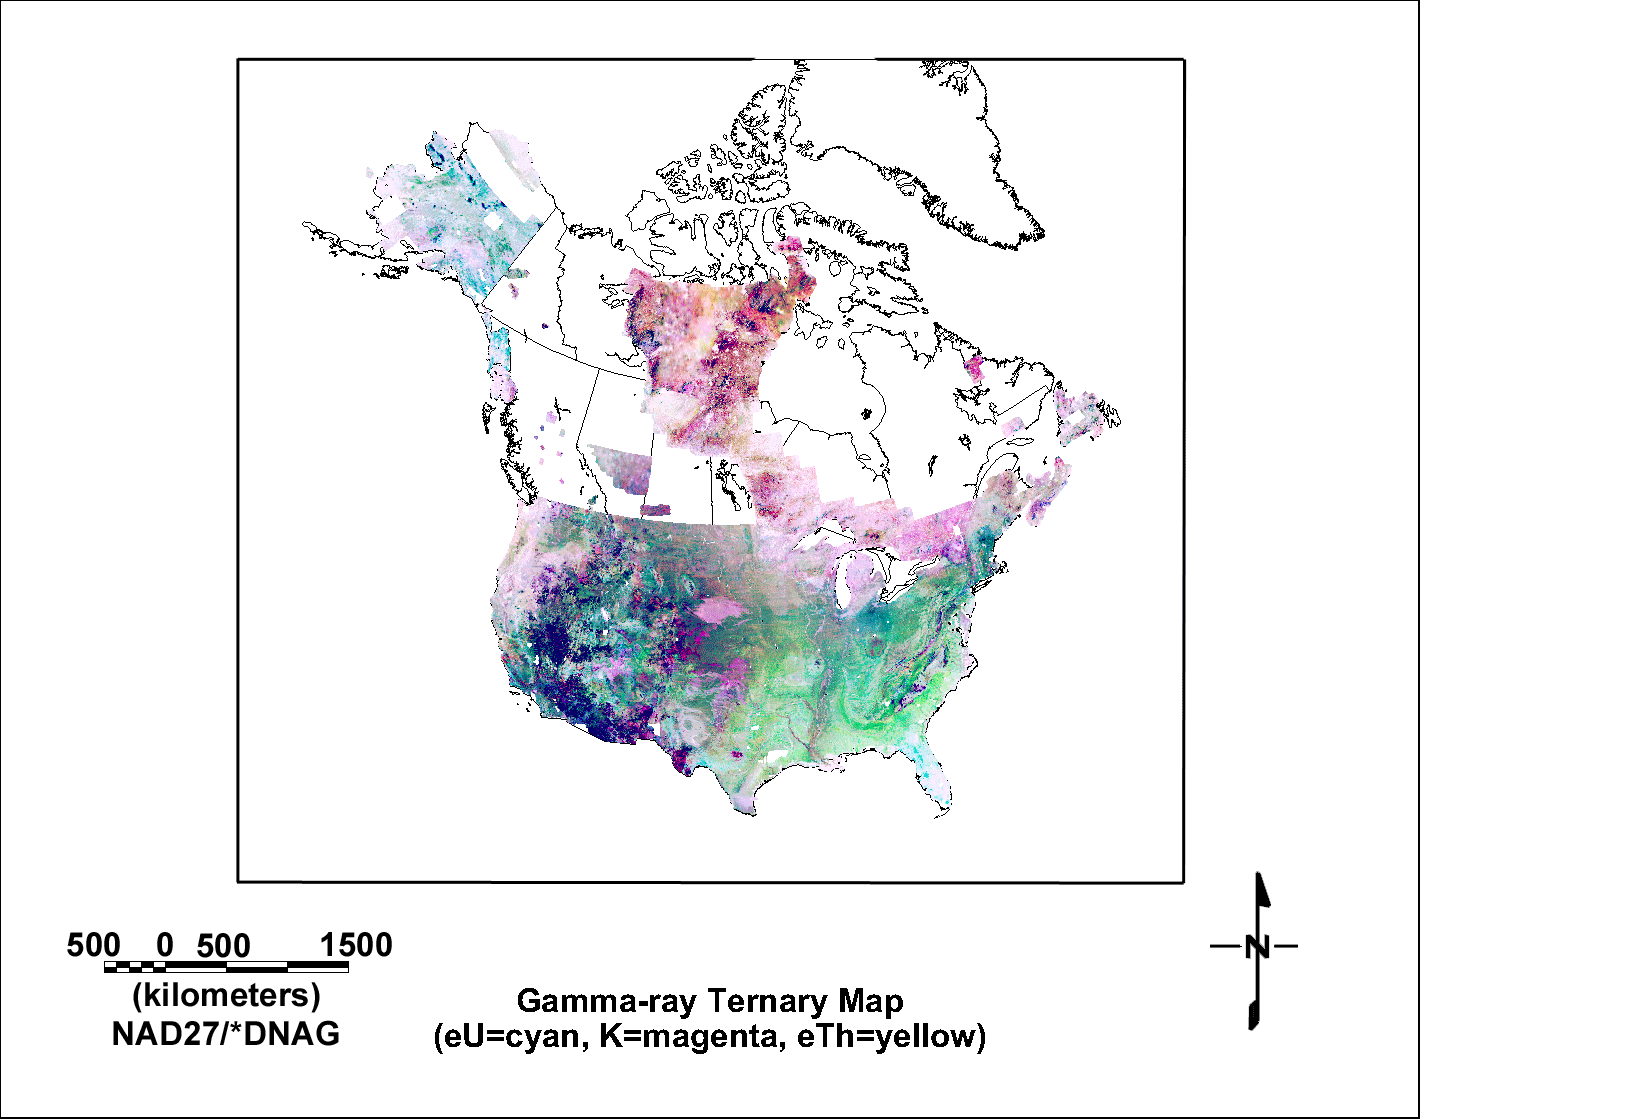 Full resolution image of the ternary map.